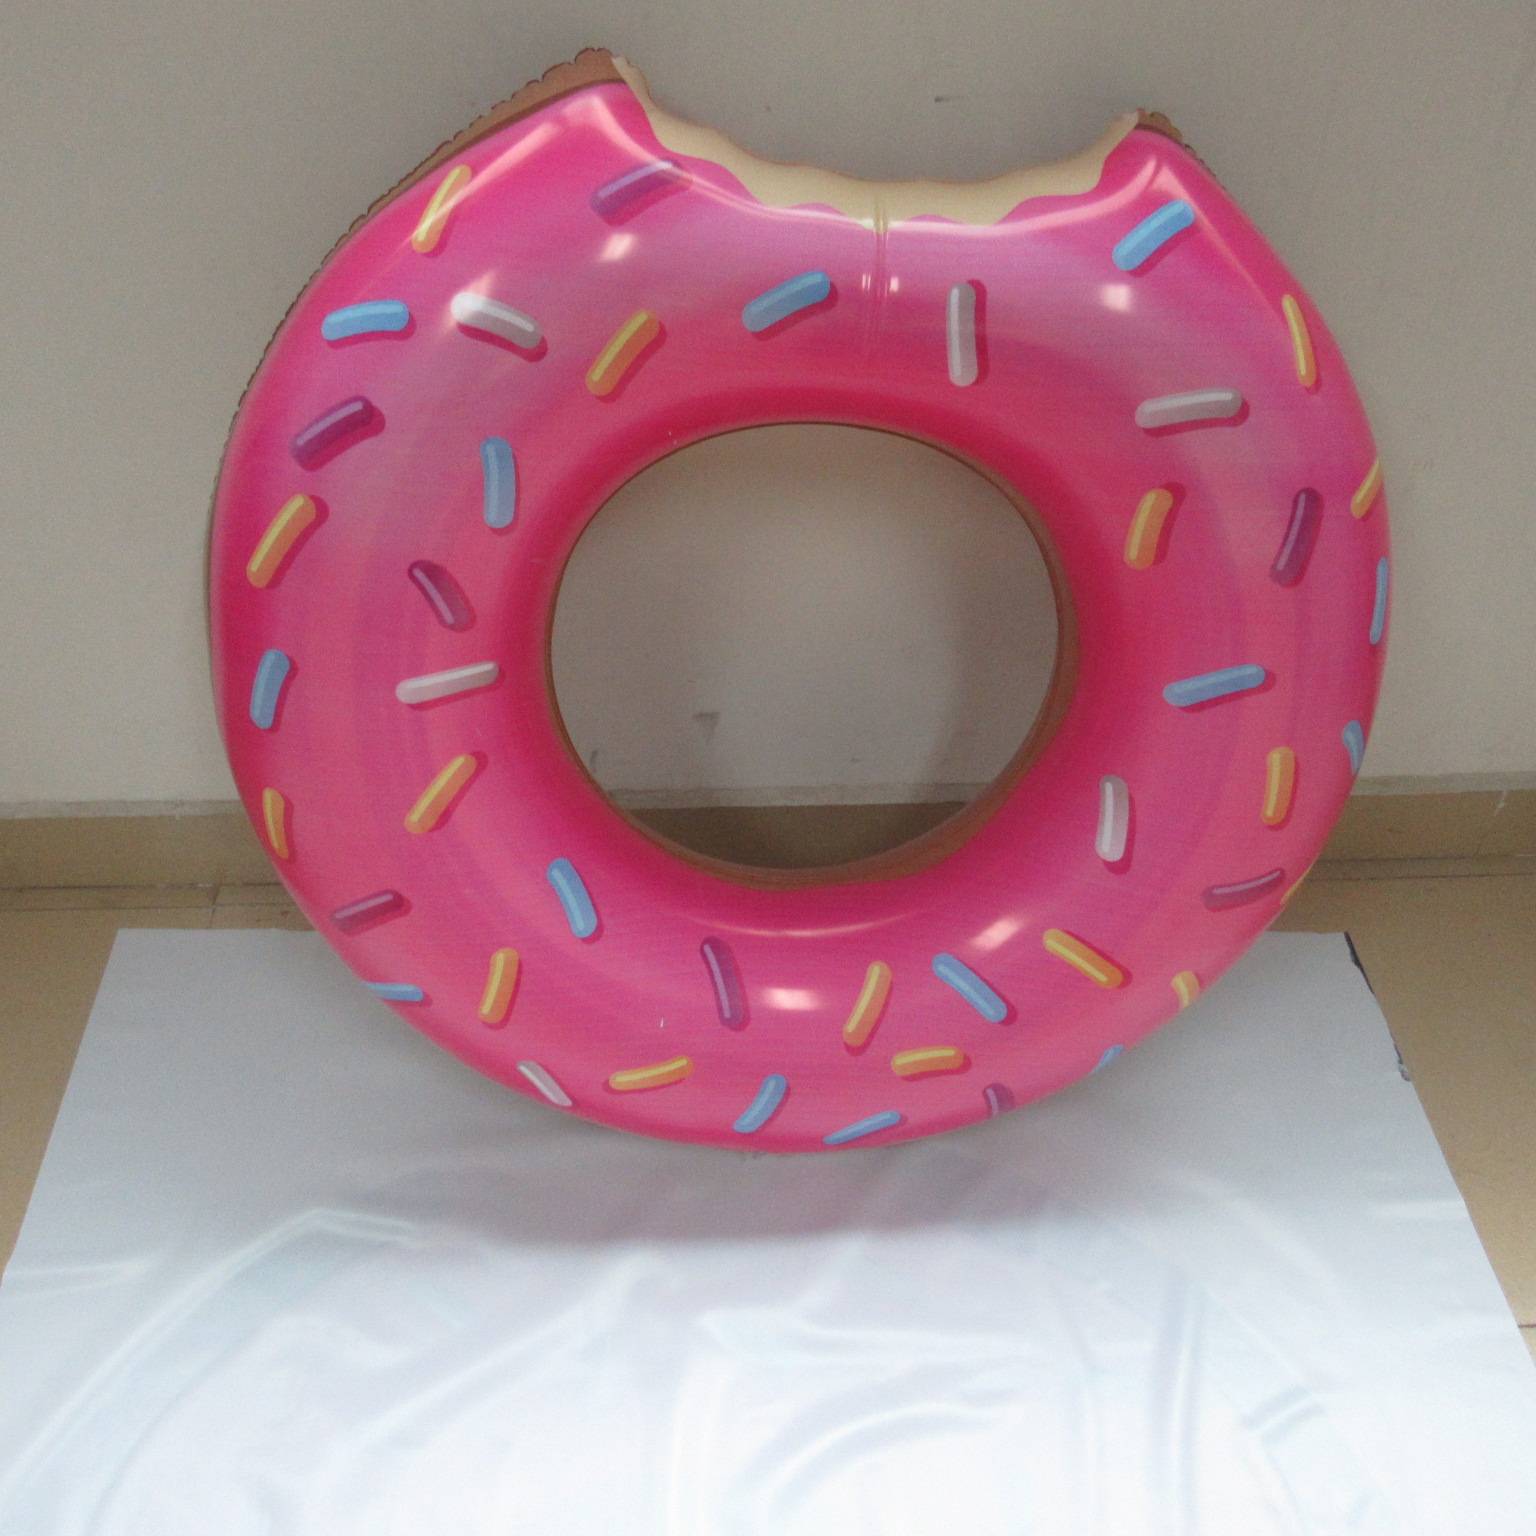 Customised Inflatable Swimming Pool Floating Donut Swimming Rings For Indoor And Outdoor